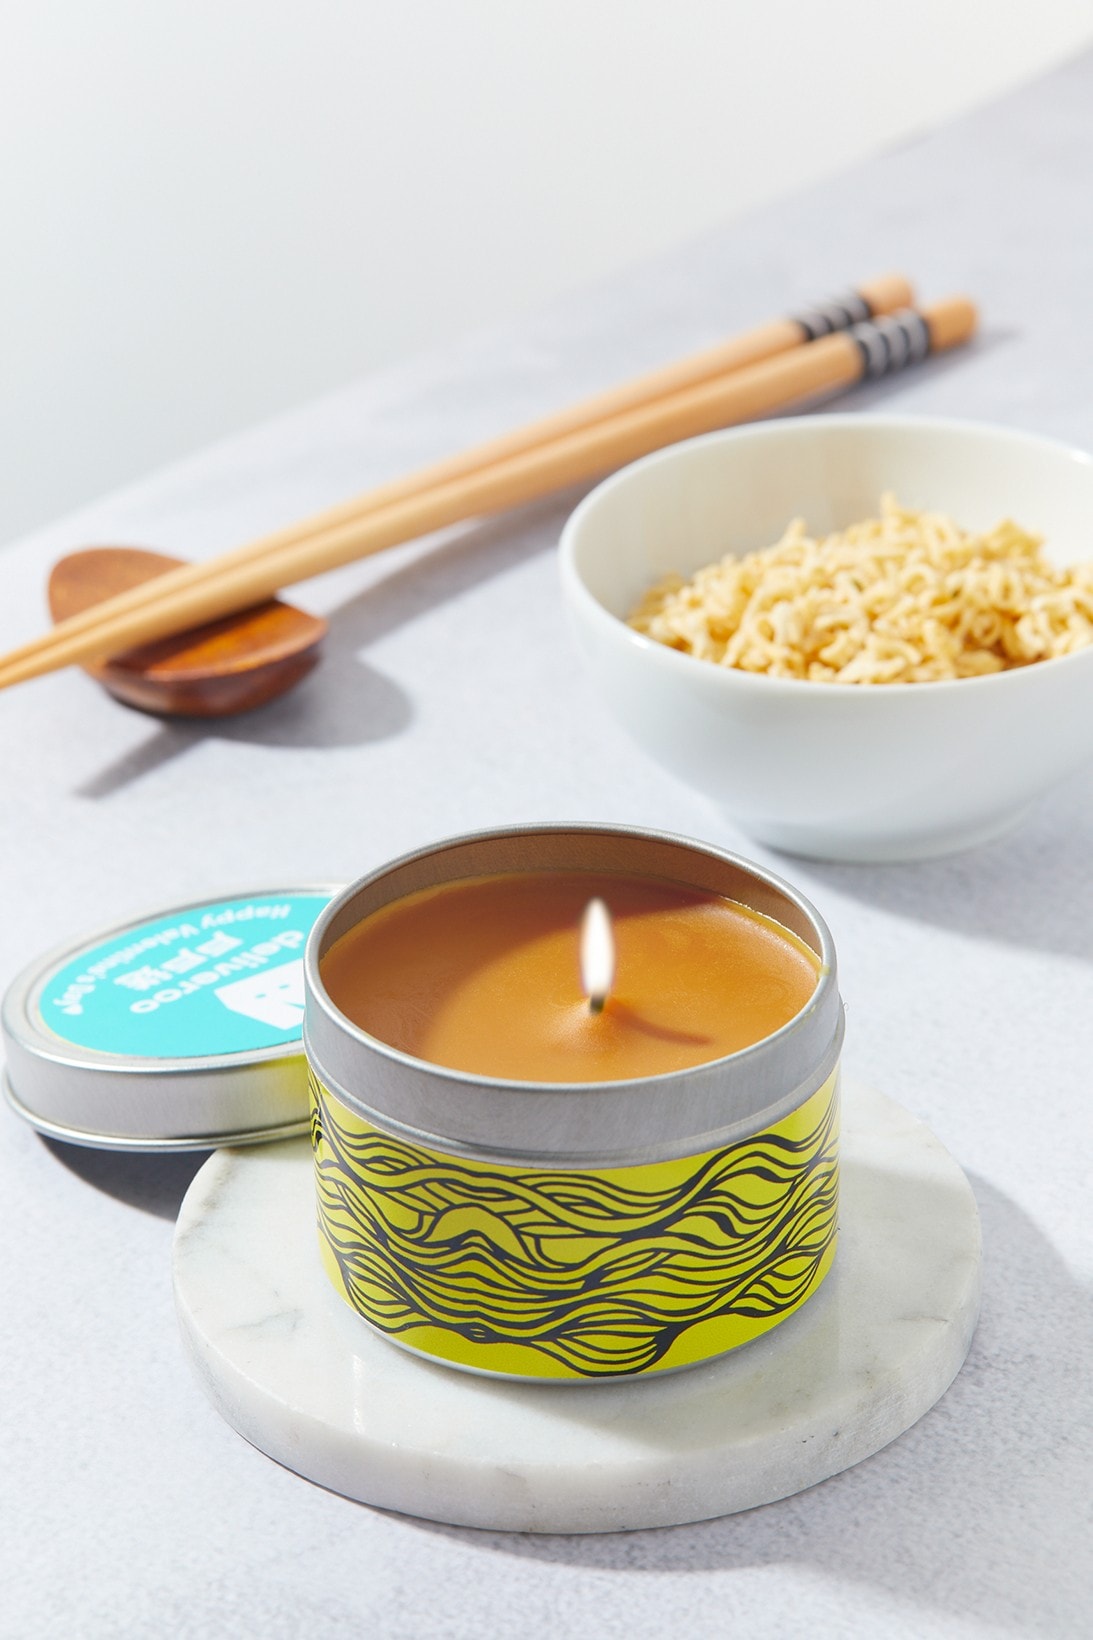 Deliveroo Food Scented Candles for Valentine's Day burgers chicken nuggets noodles giveaway free design homeware decor